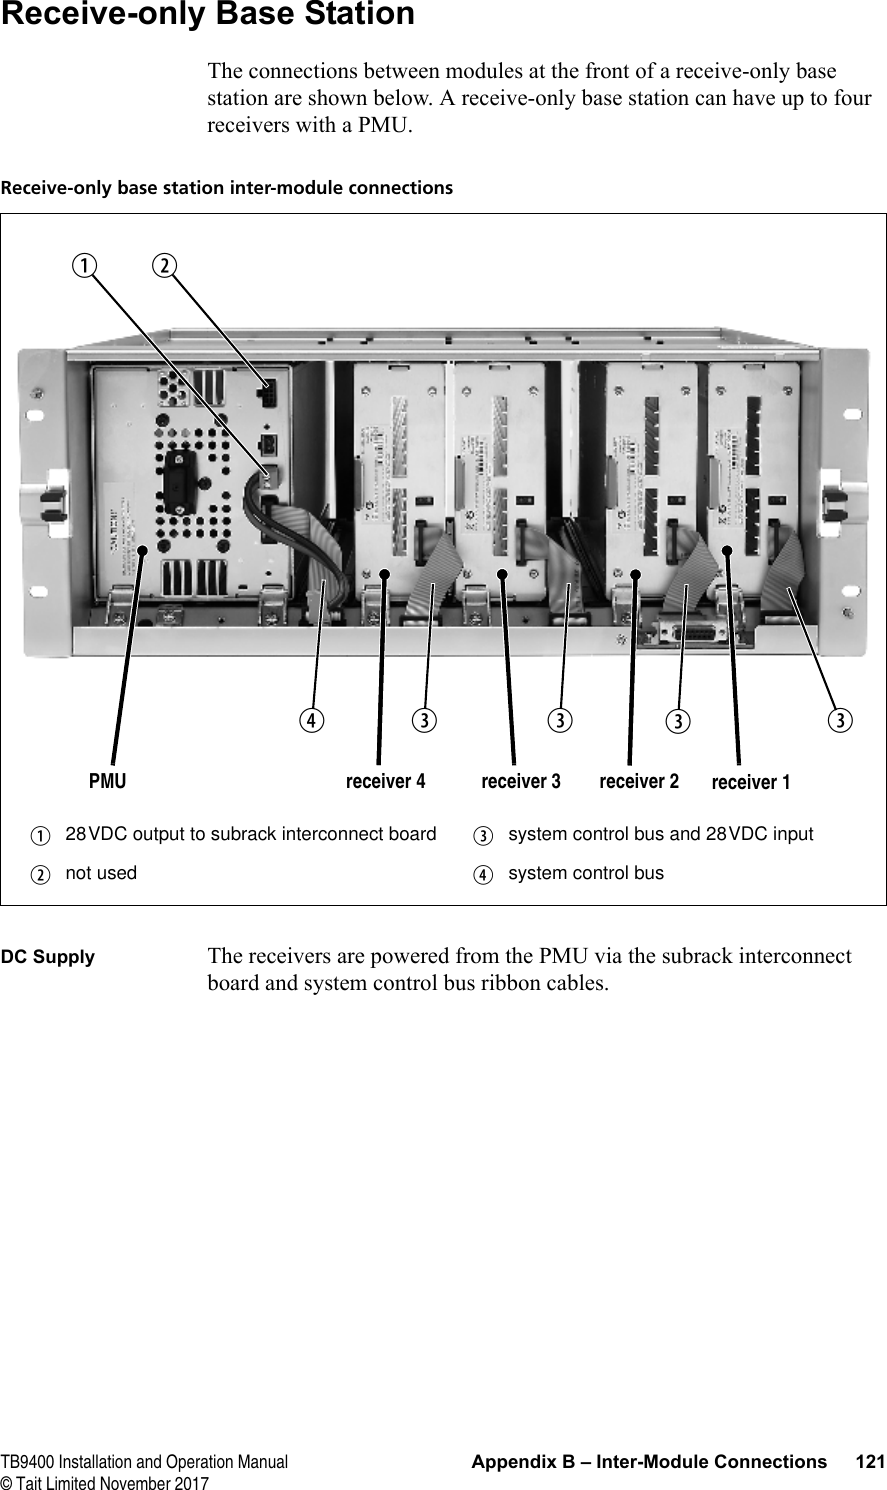  TB9400 Installation and Operation Manual Appendix B – Inter-Module Connections 121© Tait Limited November 2017Receive-only Base StationThe connections between modules at the front of a receive-only base station are shown below. A receive-only base station can have up to four receivers with a PMU.DC Supply The receivers are powered from the PMU via the subrack interconnect board and system control bus ribbon cables.Receive-only base station inter-module connectionsb28VDC output to subrack interconnect board dsystem control bus and 28VDC inputcnot used esystem control busPMU receiver 1bed dcreceiver 3 receiver 2ddreceiver 4